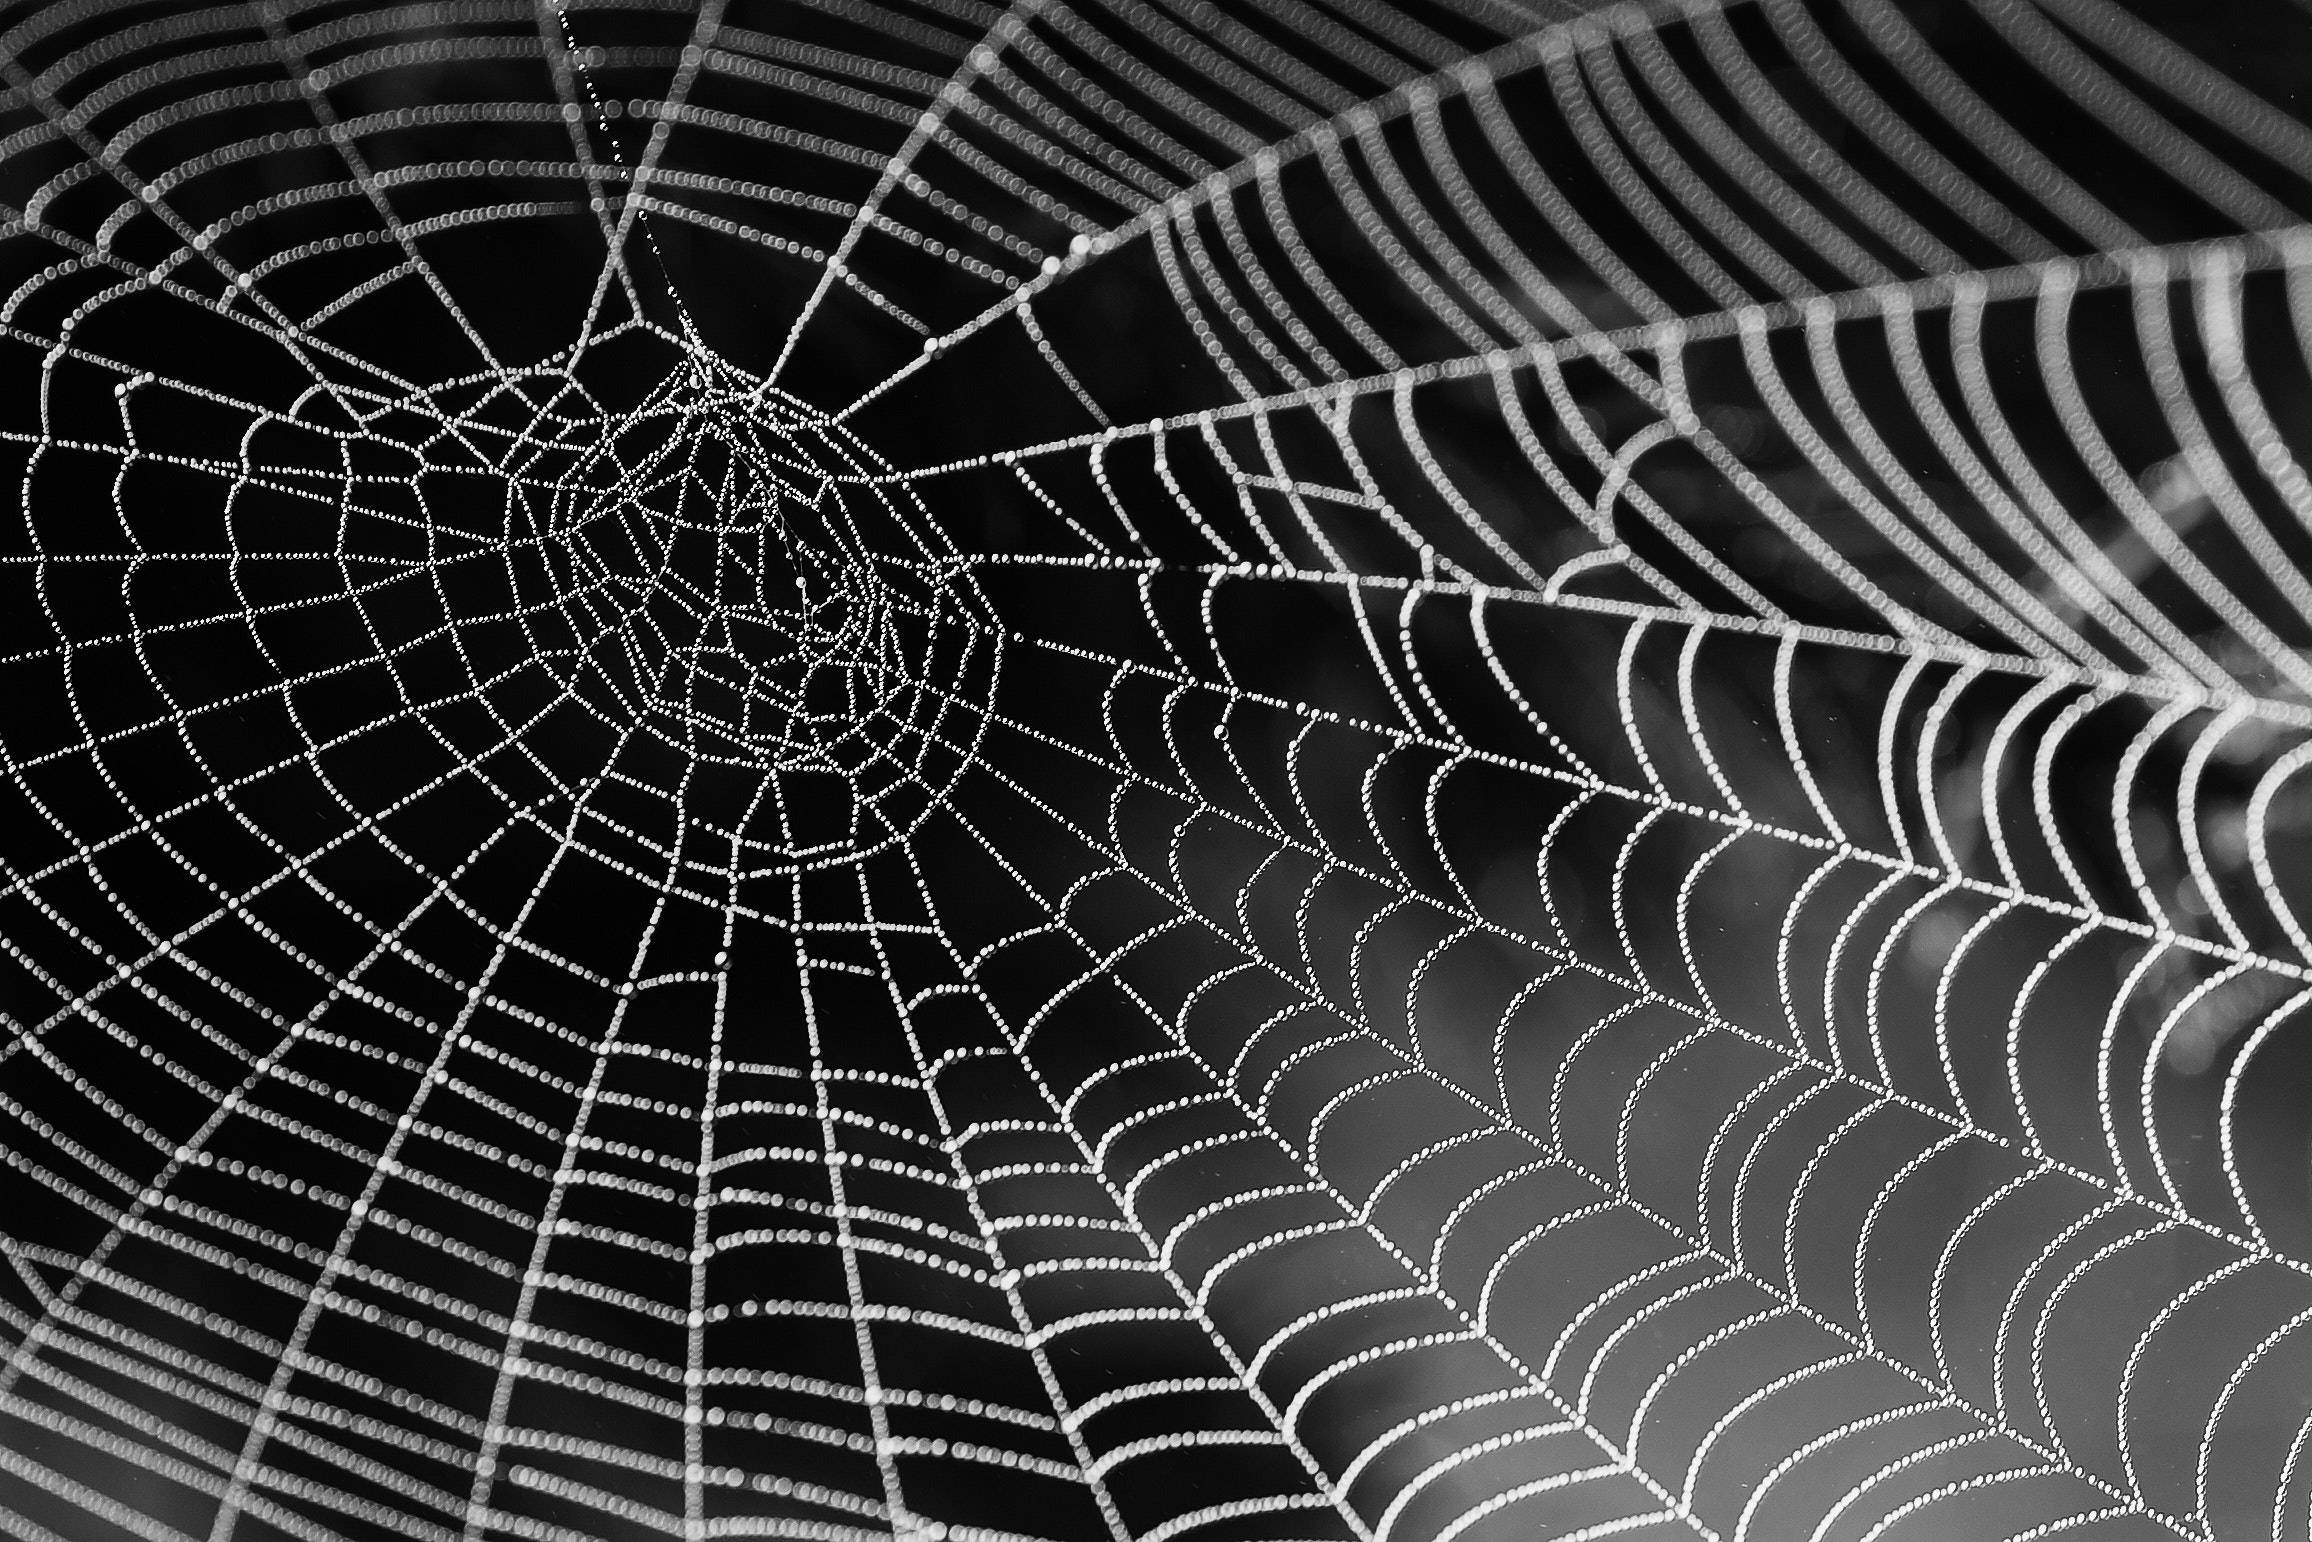 Learn about Spintex and how spiders' silk is revolutionizing the sustainable fashion industry.